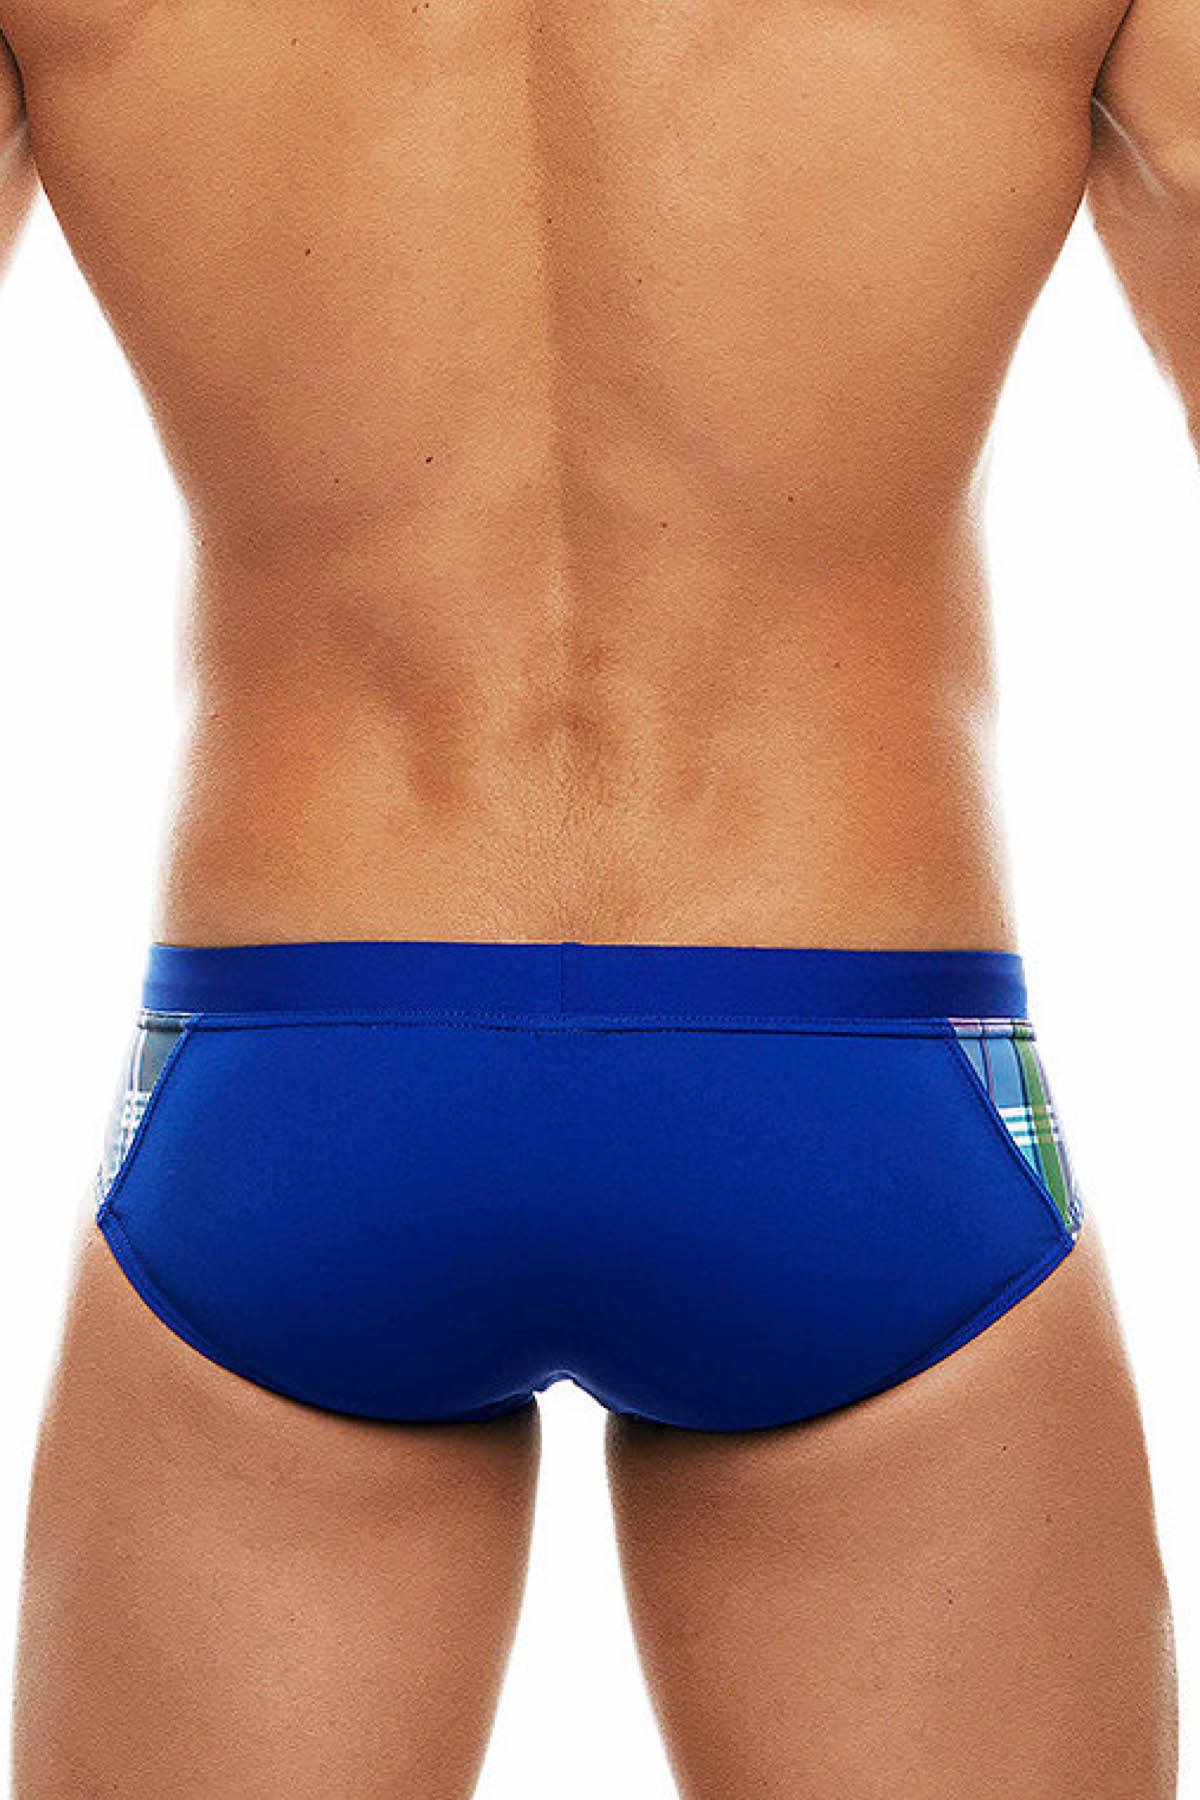 Tribe Electric-Blue/White Highland-Fling Low-Rise Swim Brief